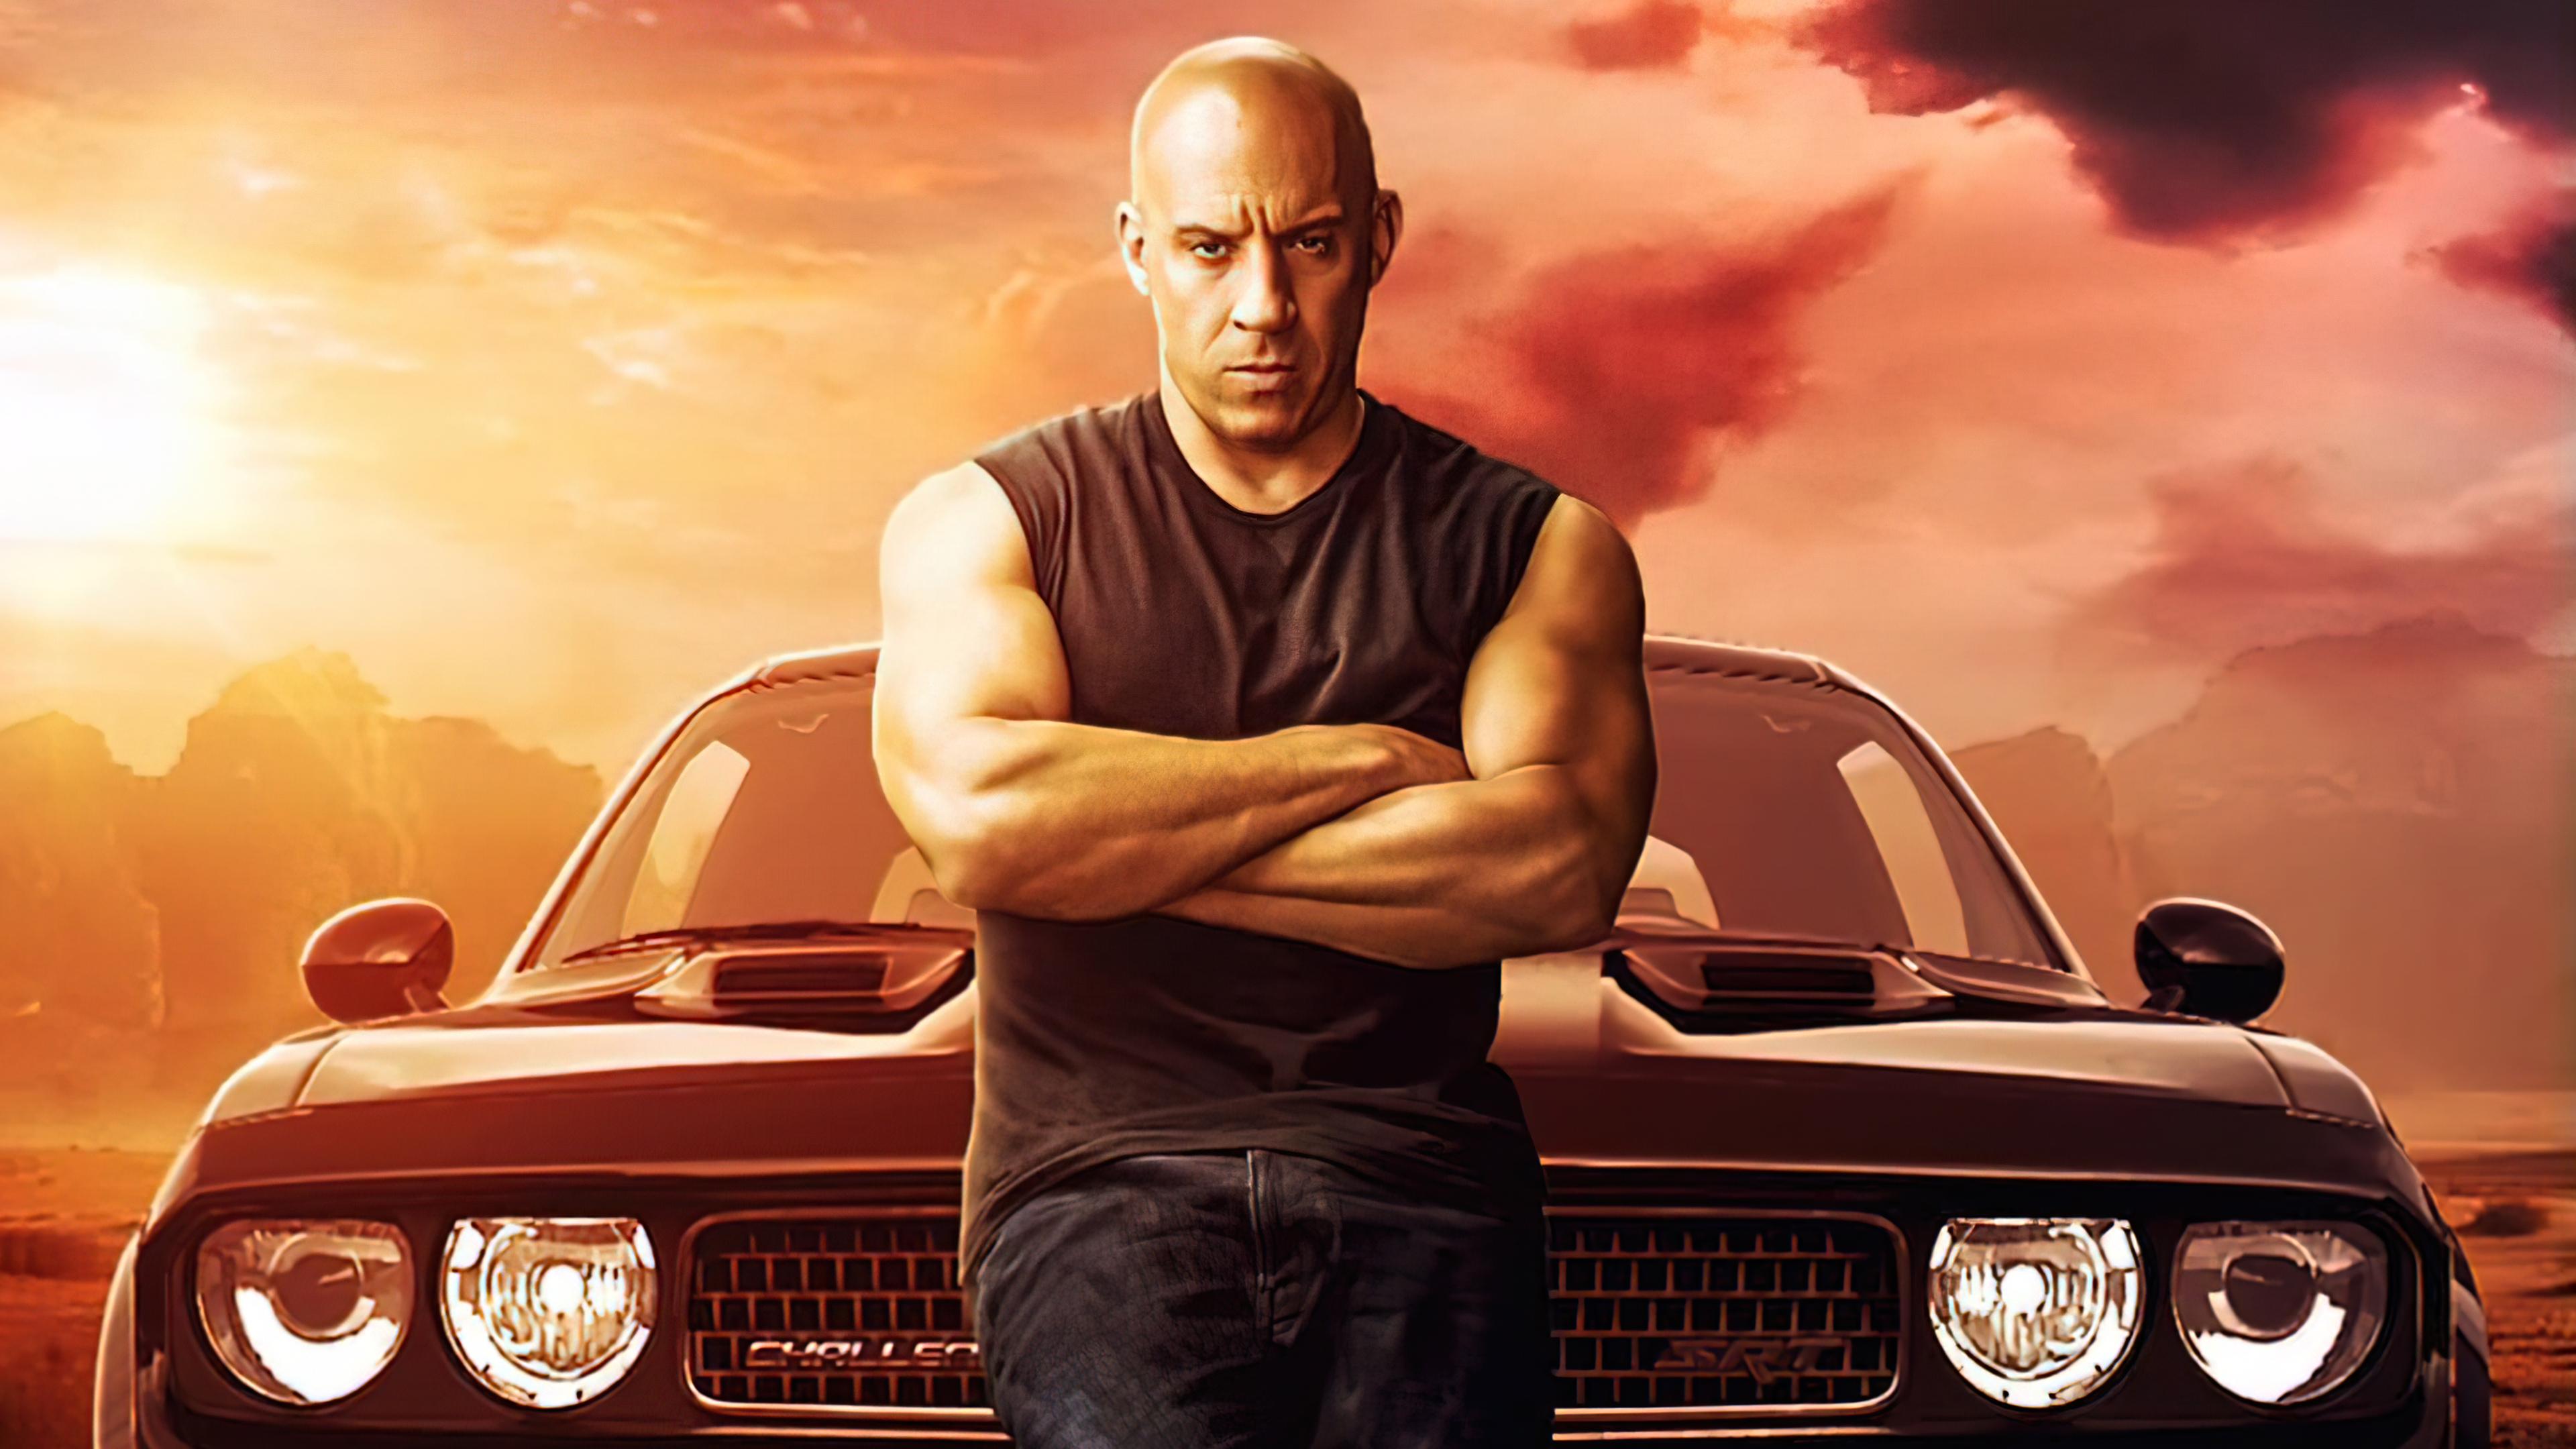 Fast and Furious Laptop Wallpapers - Top Free Fast and Furious Laptop ...